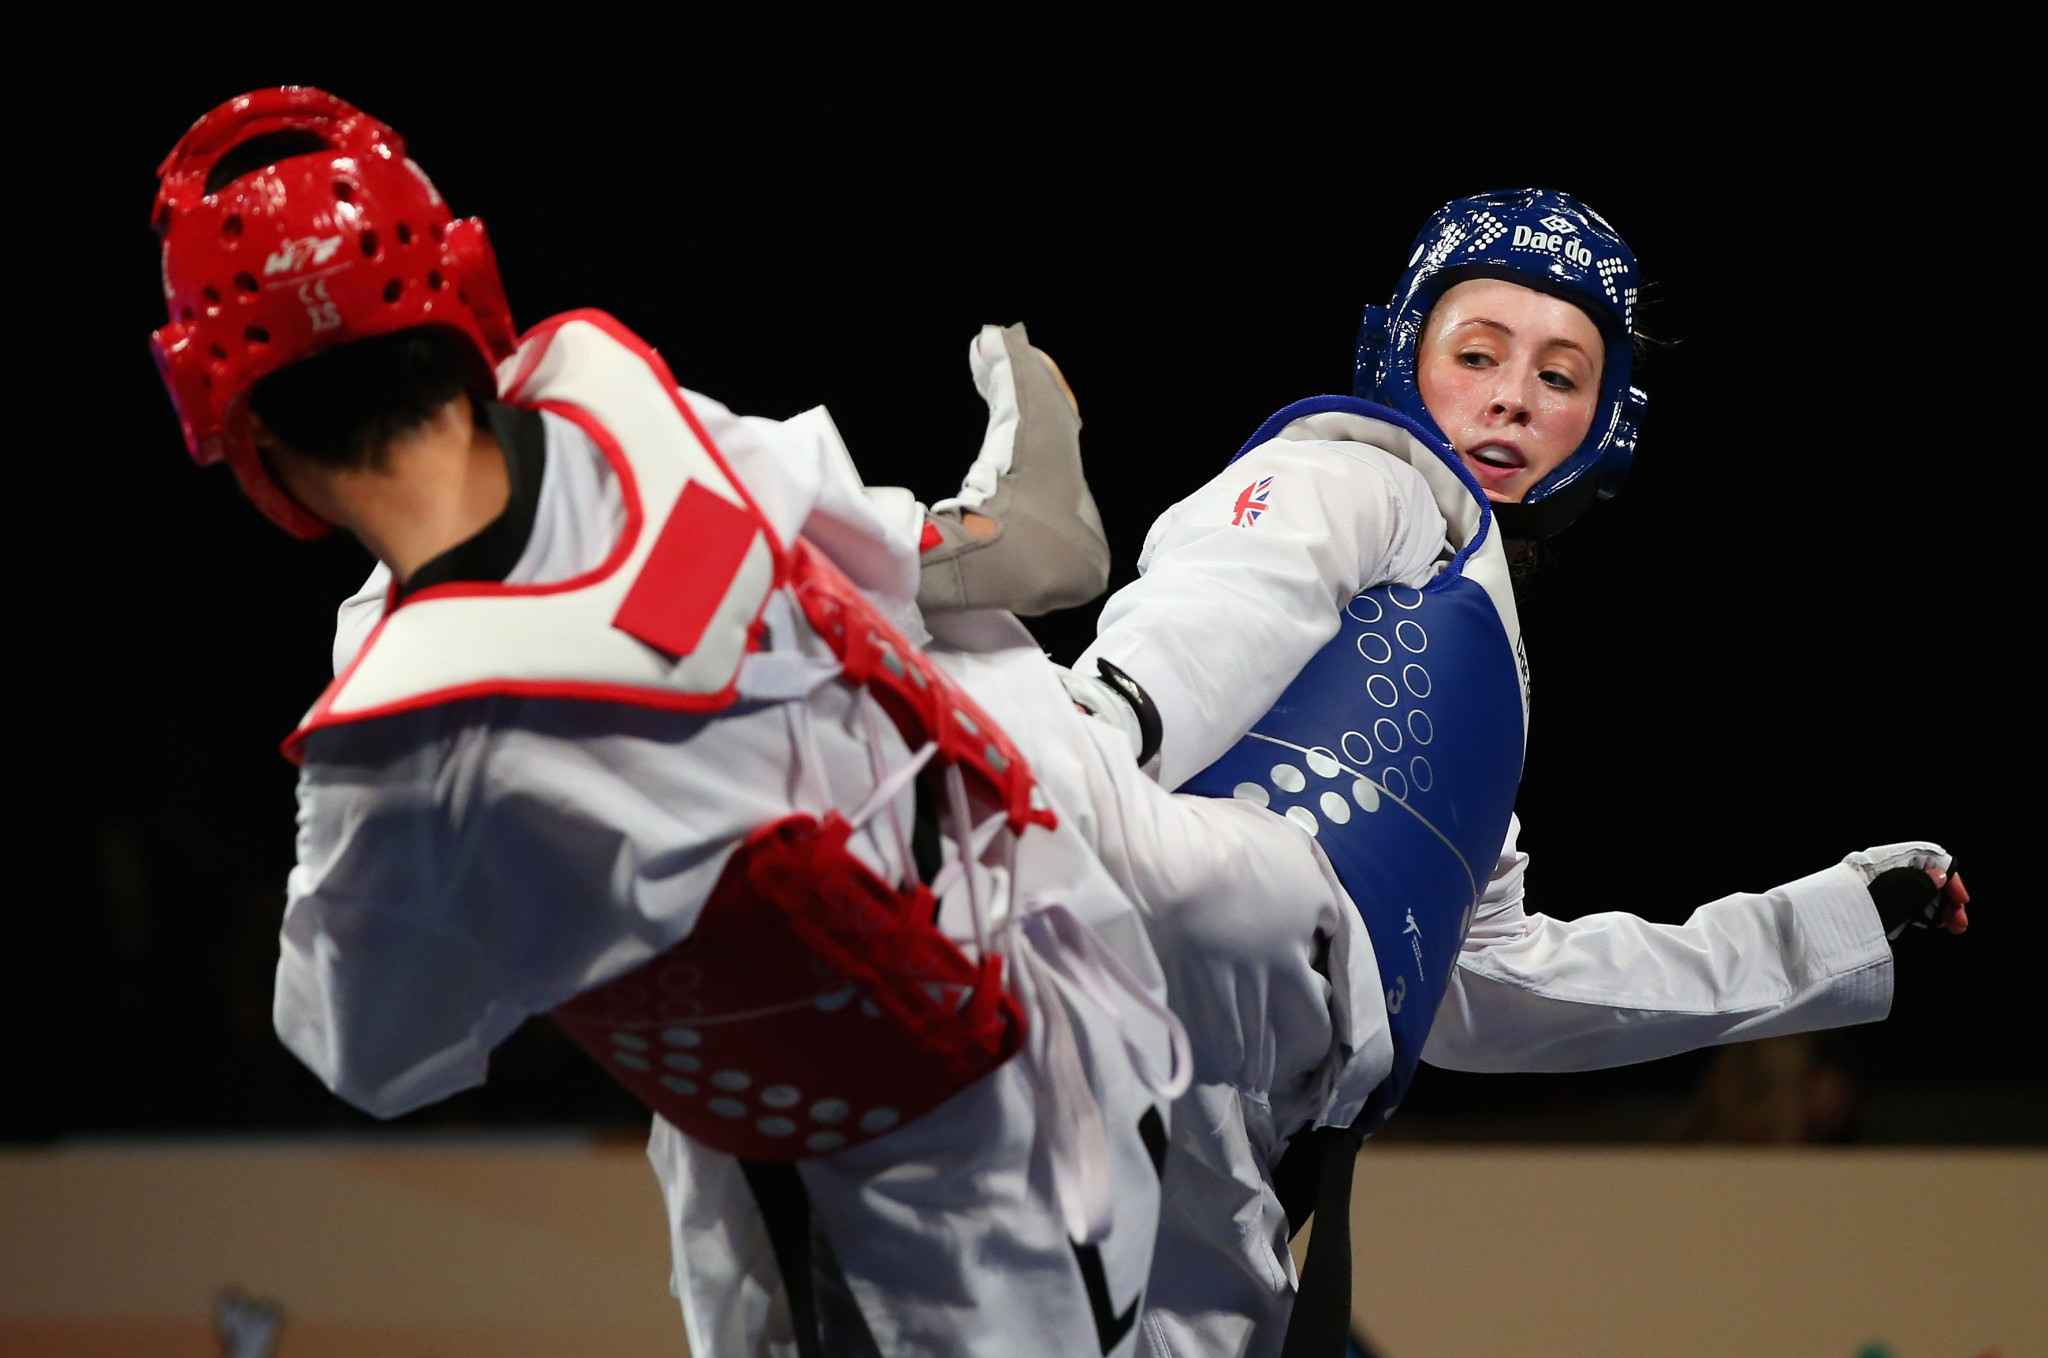 Britain's Jade Jones will hope to become world champion at the World Taekwondo Championships in Manchester ©Getty Images